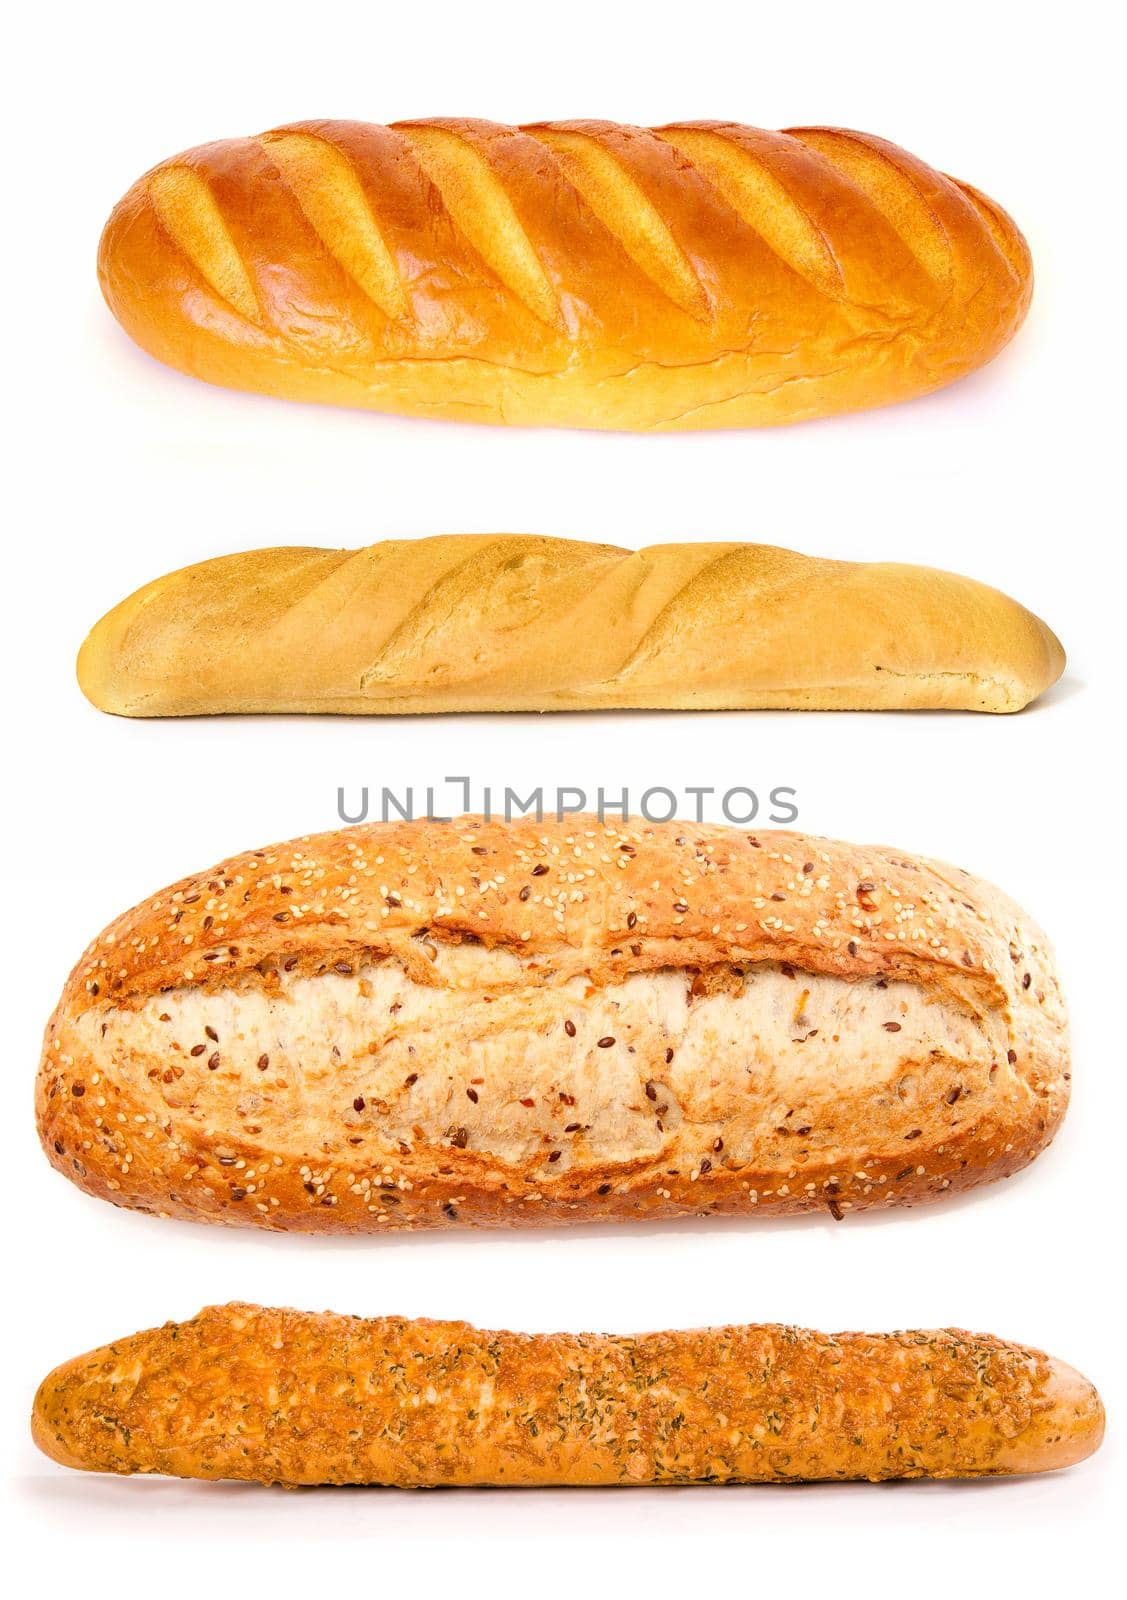 Set of a loafes on a white background